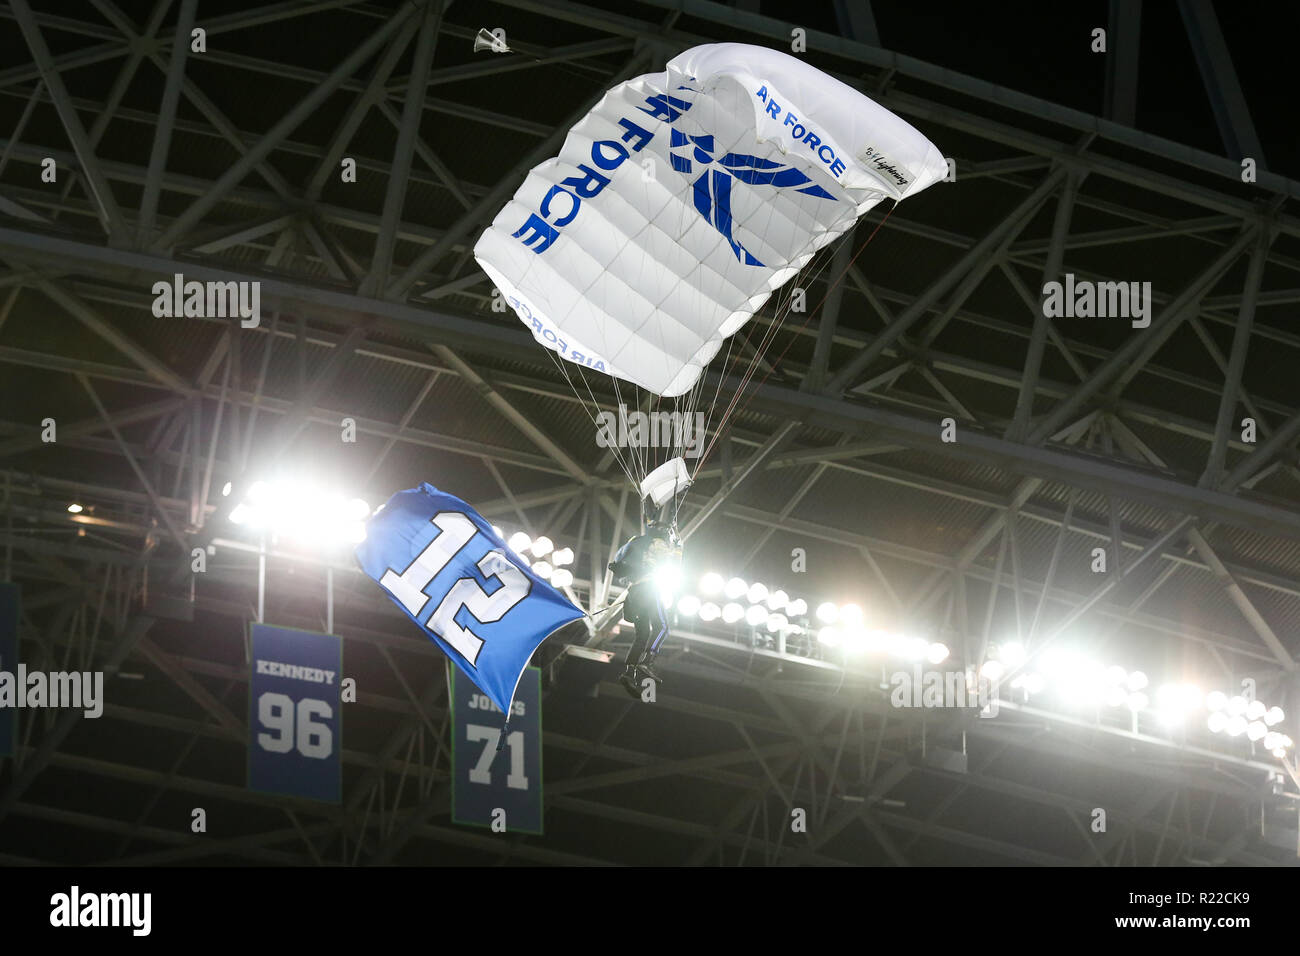 Seattle, WA, USA. 15th Nov, 2018. Members of the armed services parachute into CenturyLink Field before the start of an NFL game between the Green Bay and Seattle Seahawks at CenturyLink Field in Seattle, WA. Sean Brown/CSM/Alamy Live News Stock Photo